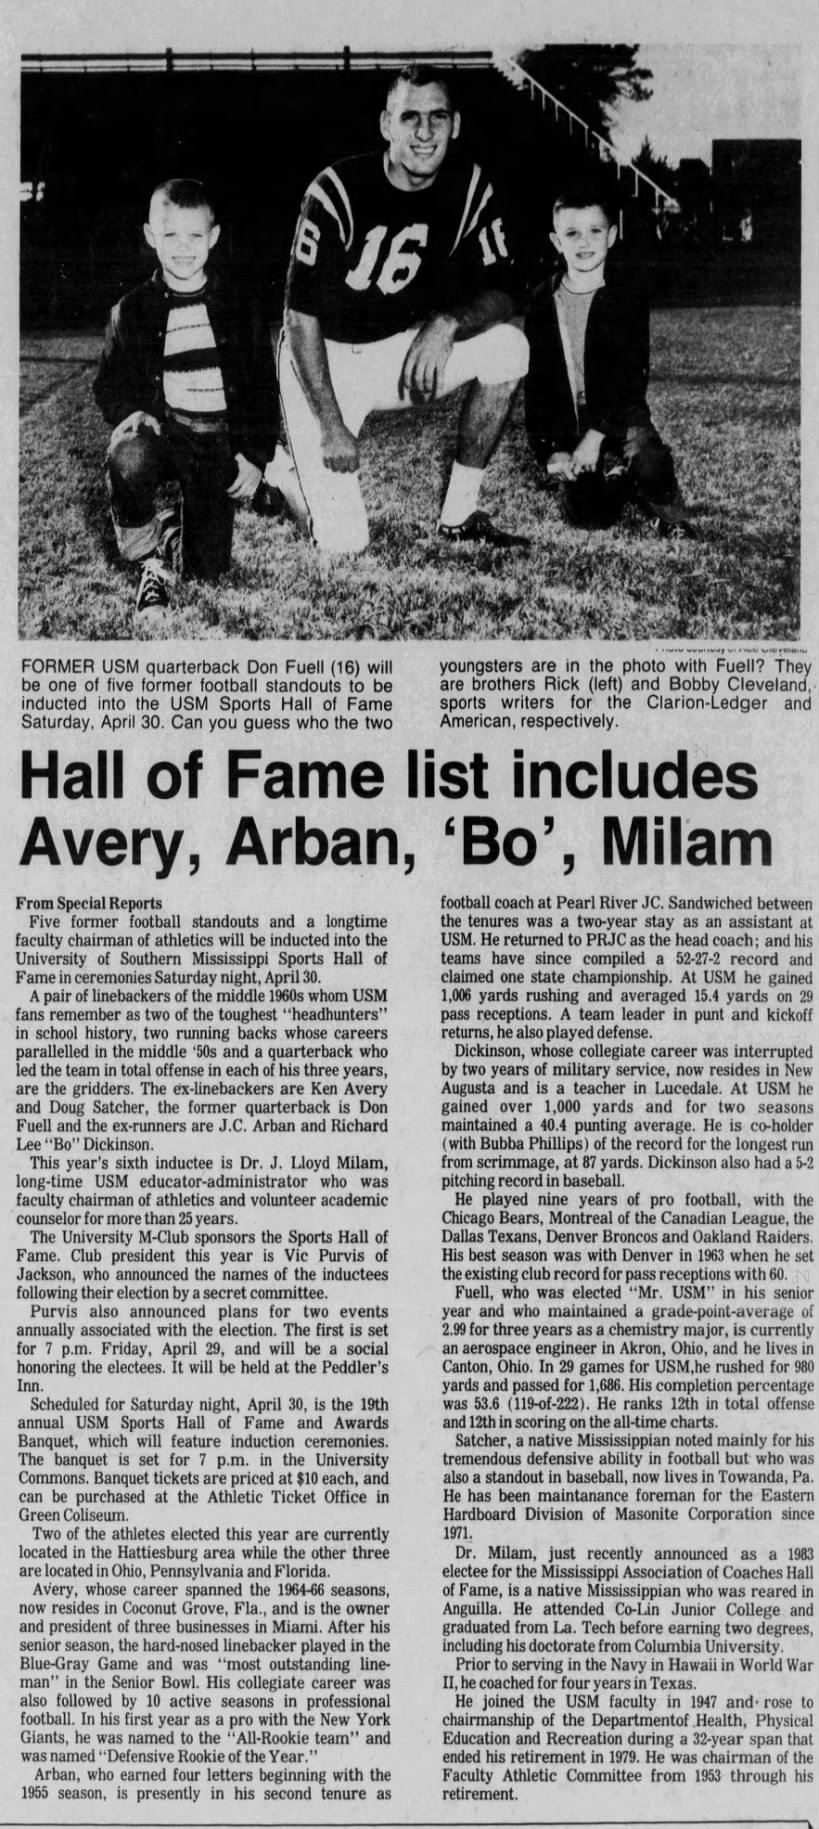 Hall of Fame list includes Avery, Arban, 'Bo', Milam